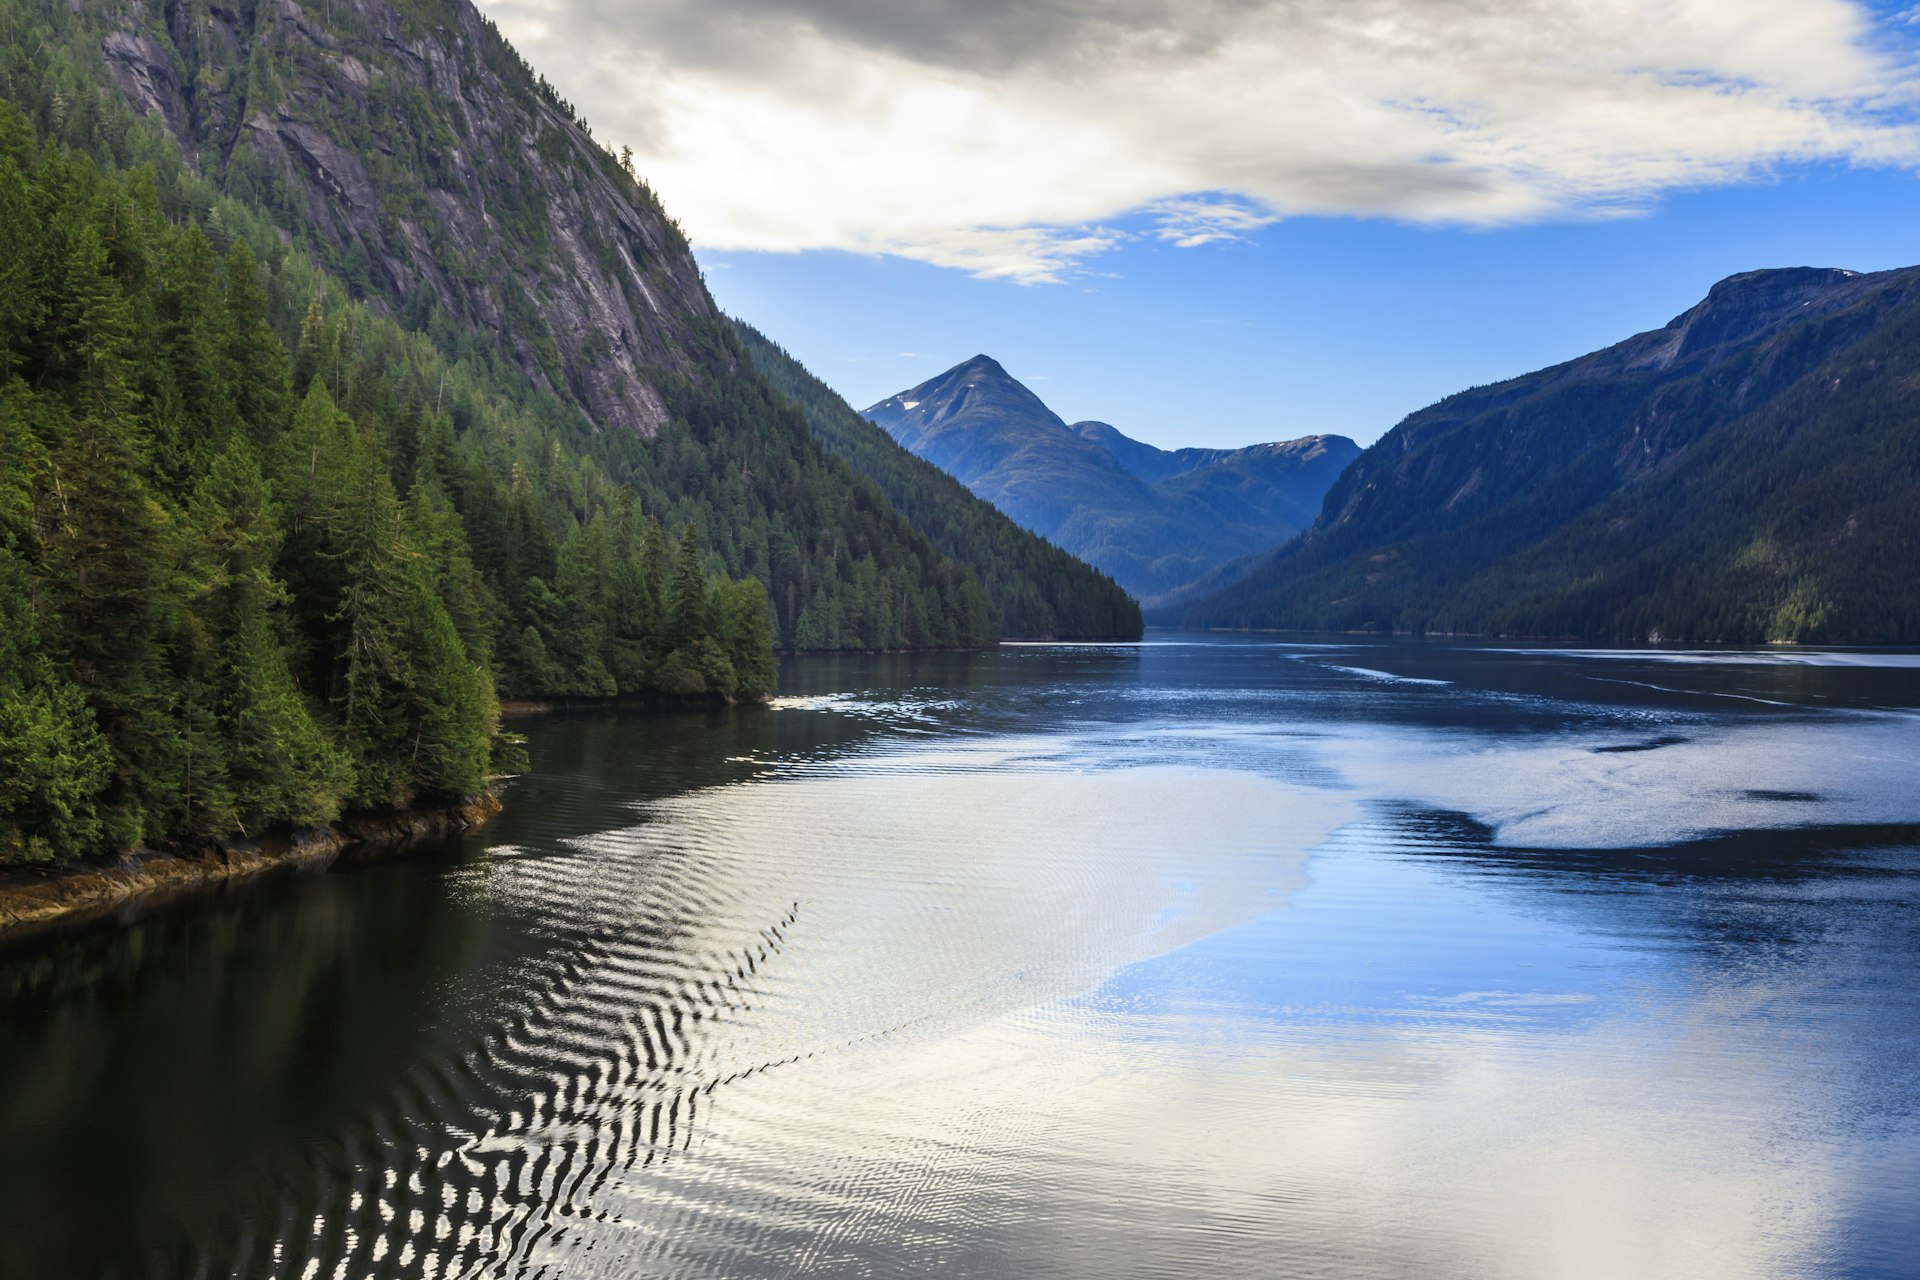 Misty Fjords National Monument, Tongass National Forest, Alaska